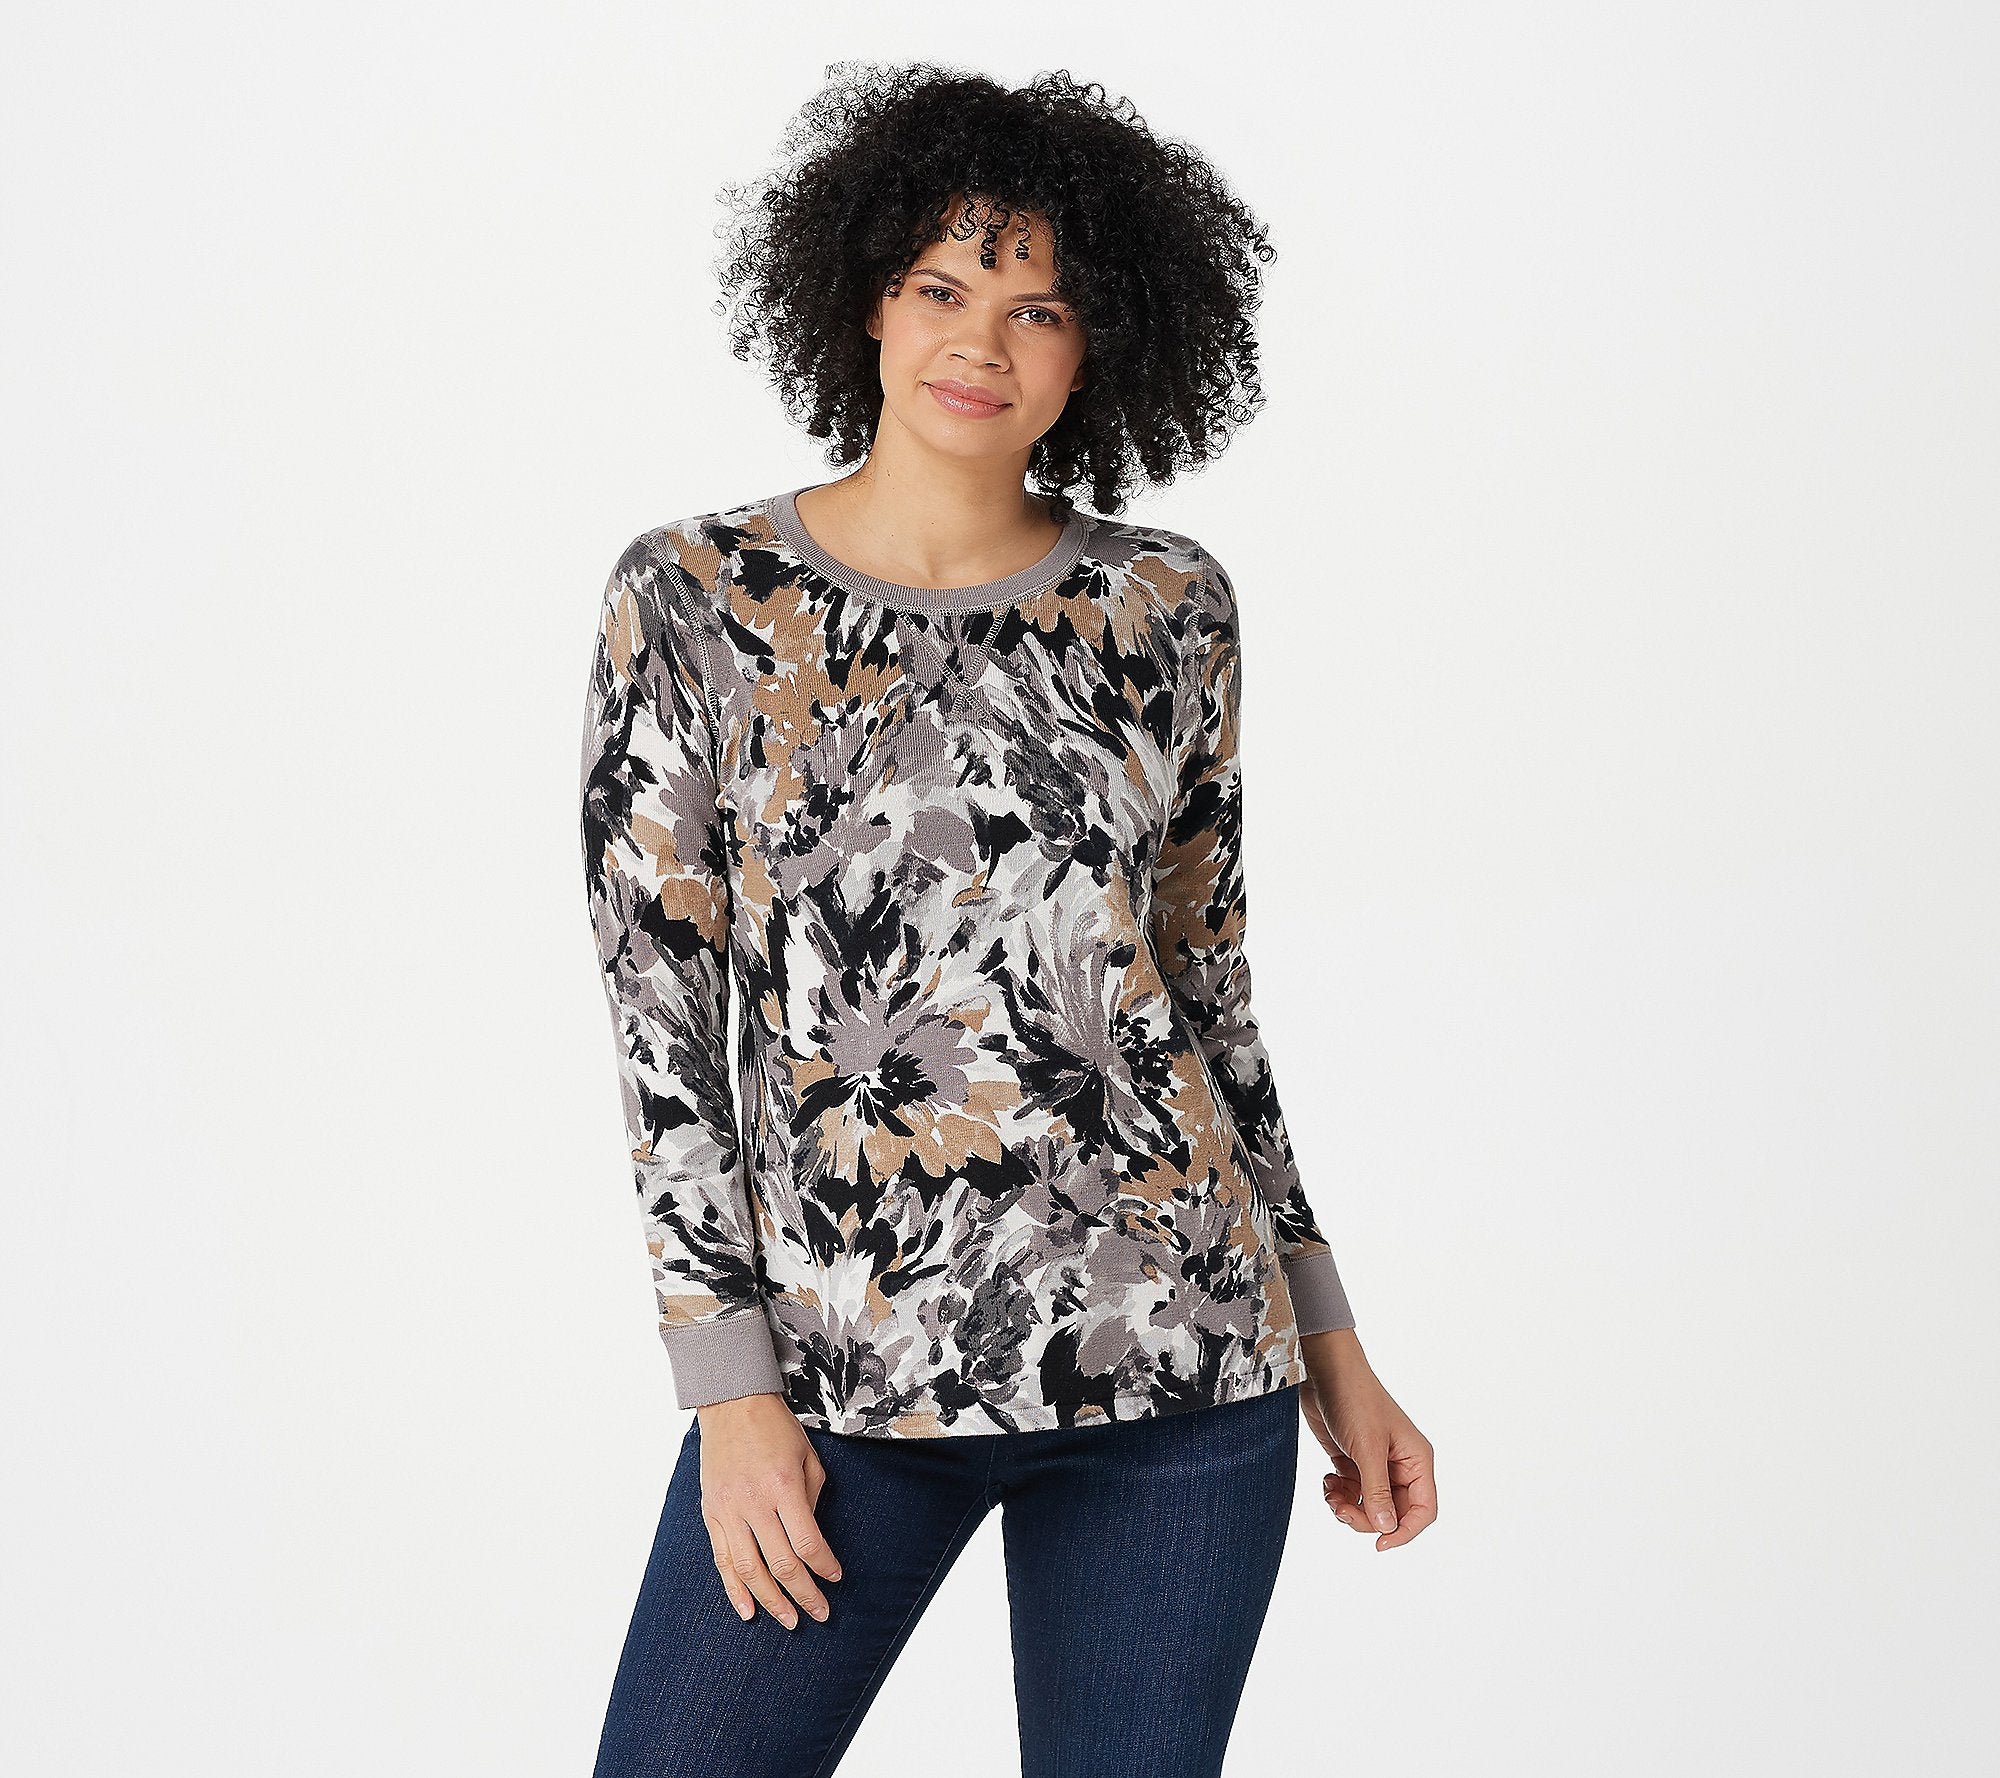 Isaac Mizrahi Live! Floral Printed Sweater with Cover Stitch Detail